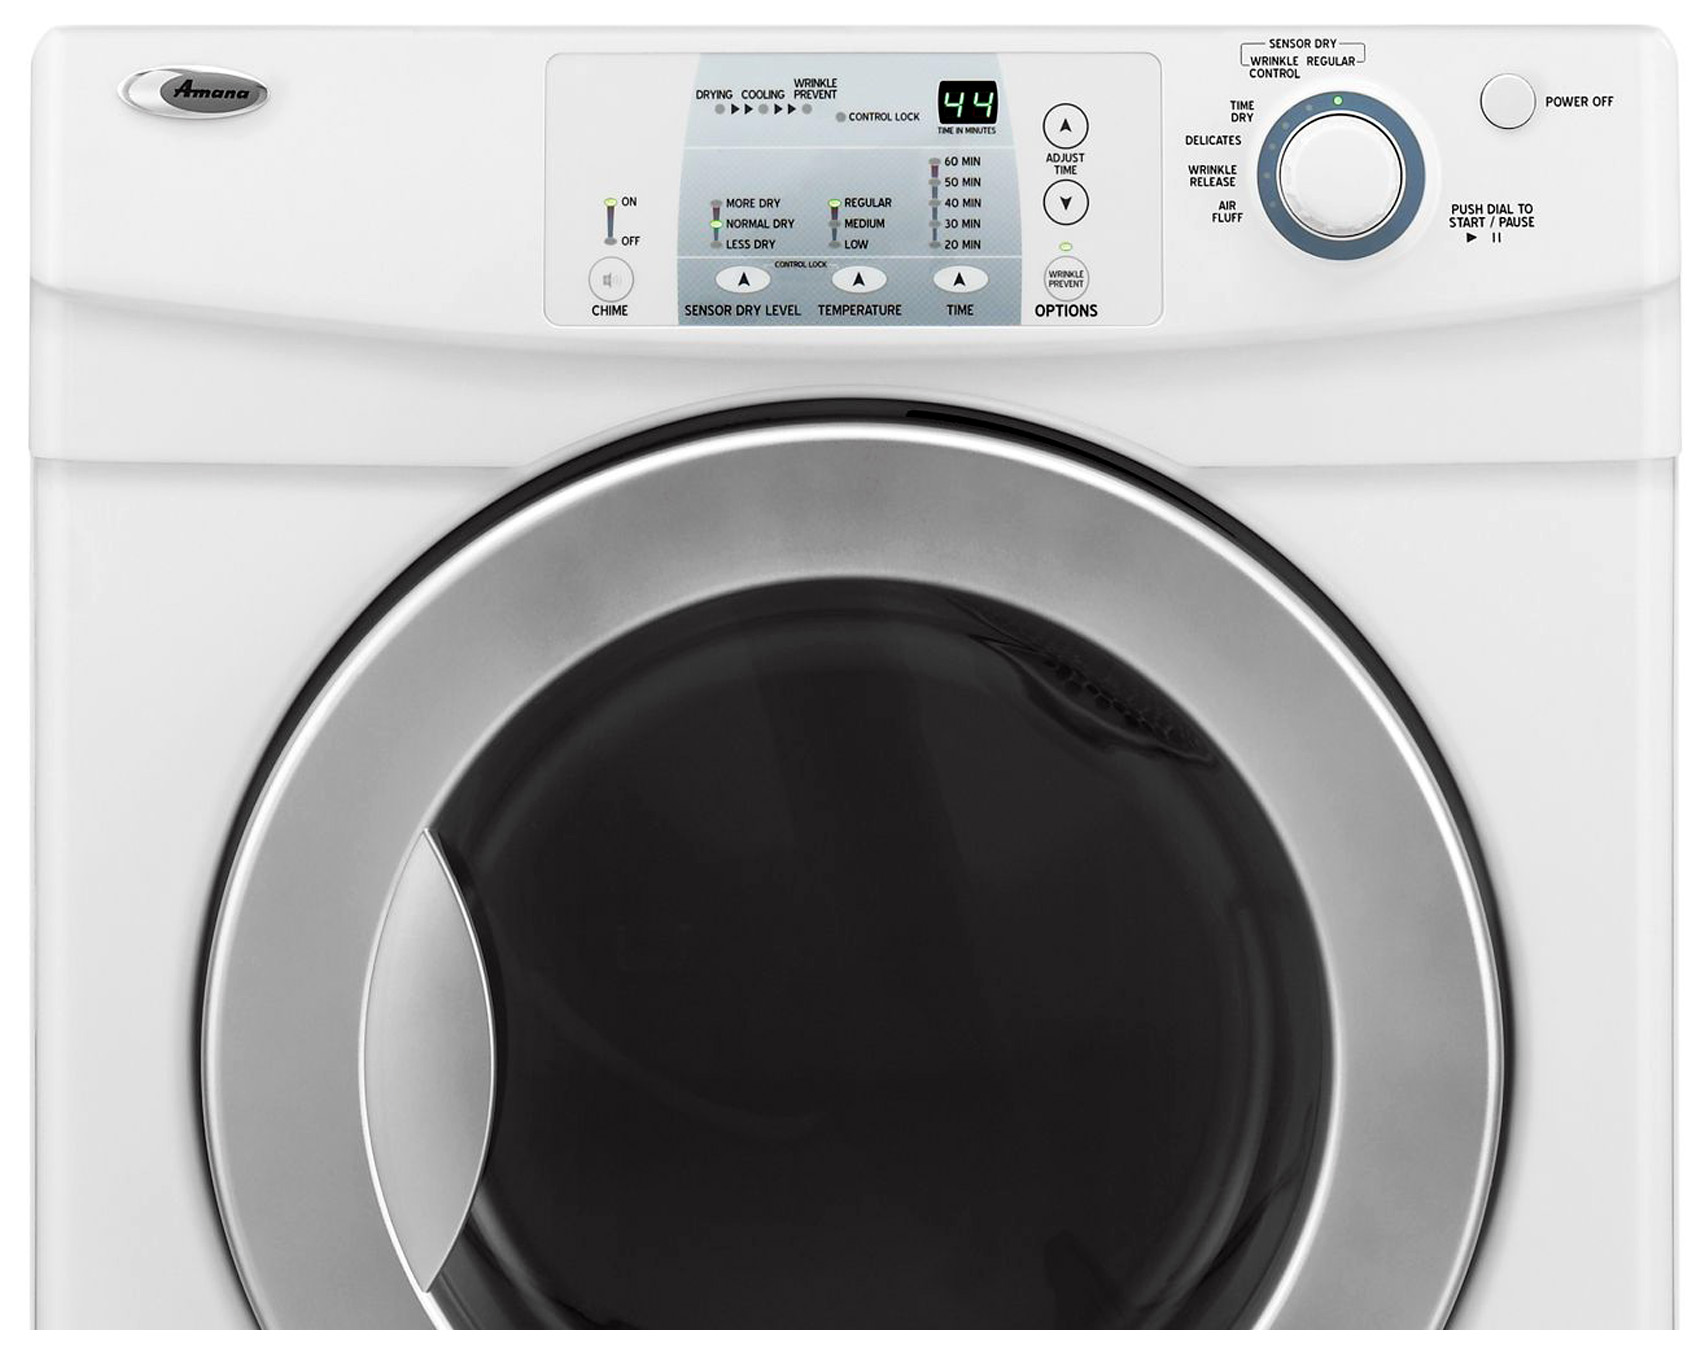 reasons why your Amana Dryer won't start 1.0